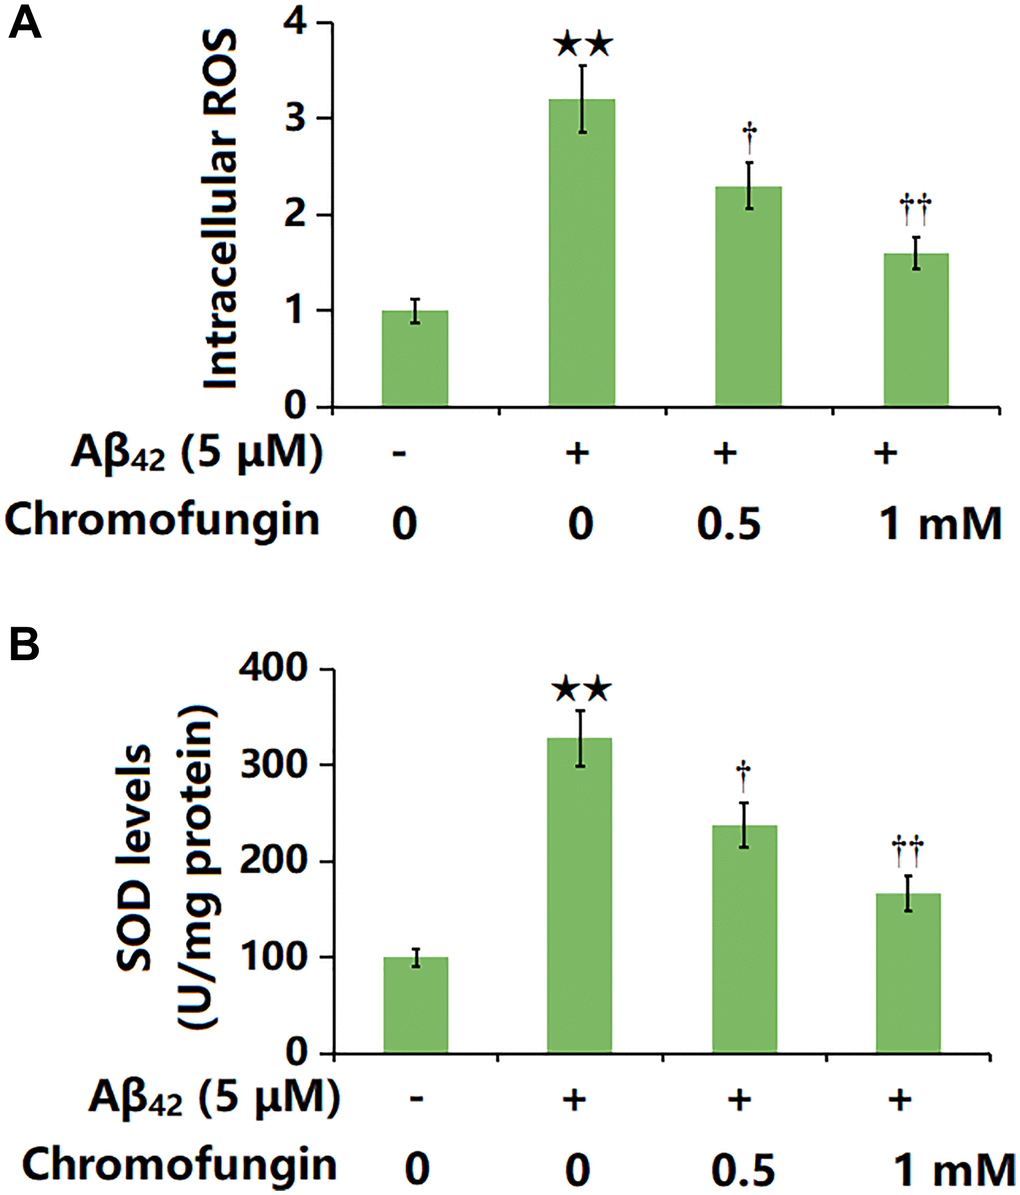 Chromofungin ameliorated oligomeric Aβ42-induced oxidative stress in M17 neuronal cells. Cells were stimulated with oligomeric Aβ42 (5 μM) with or without Chromofungin (0.5, 1 mM) for 24 hours. (A) Intracellular ROS was measured using DCFH-DA staining; (B) The levels of SOD (n = 6, **P †, ††P 42 group).